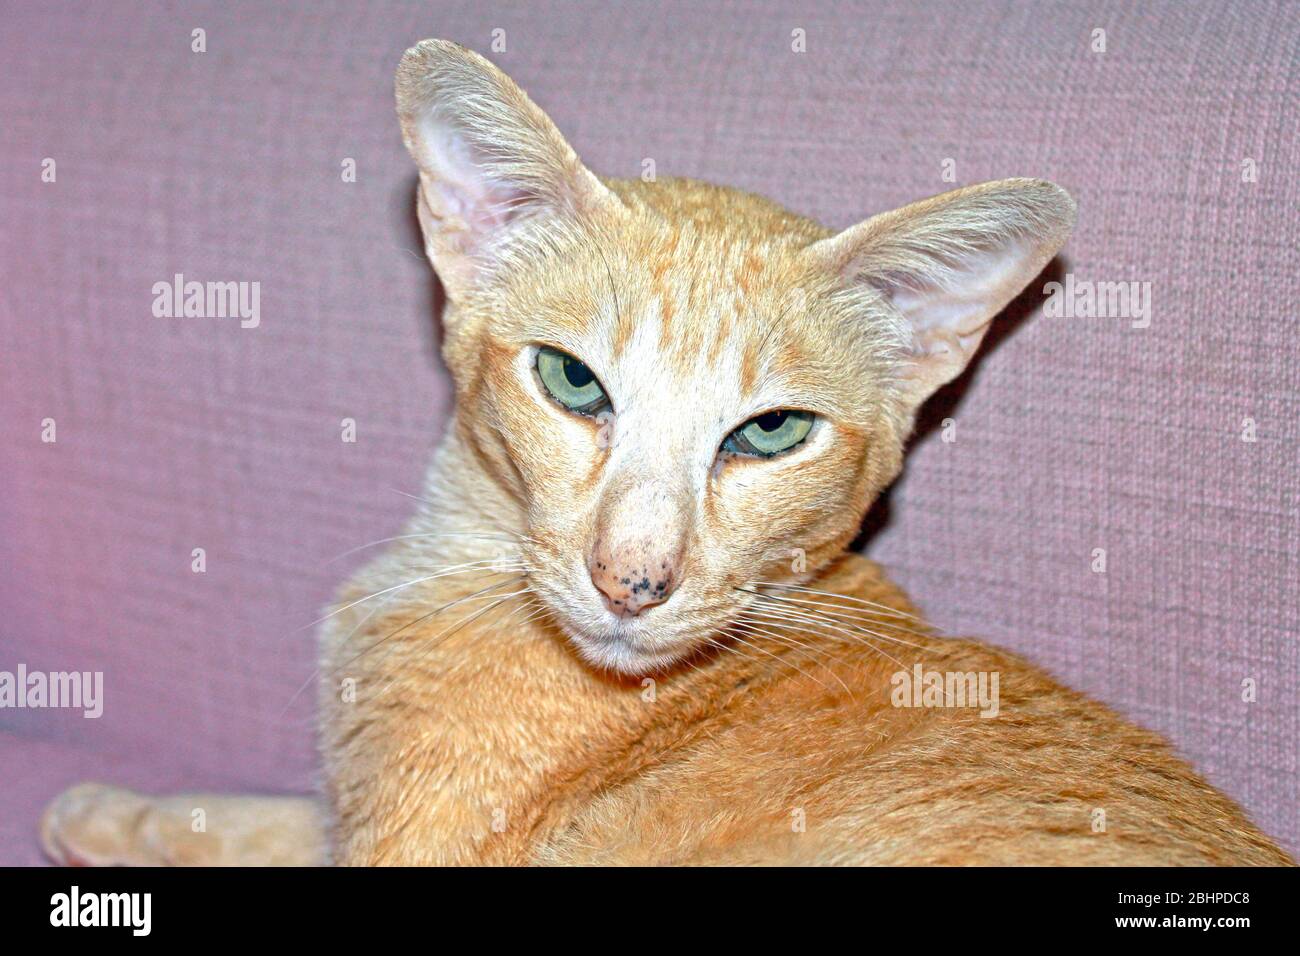 Red-spotted tabby oriental or Siamese cat Stock Photo